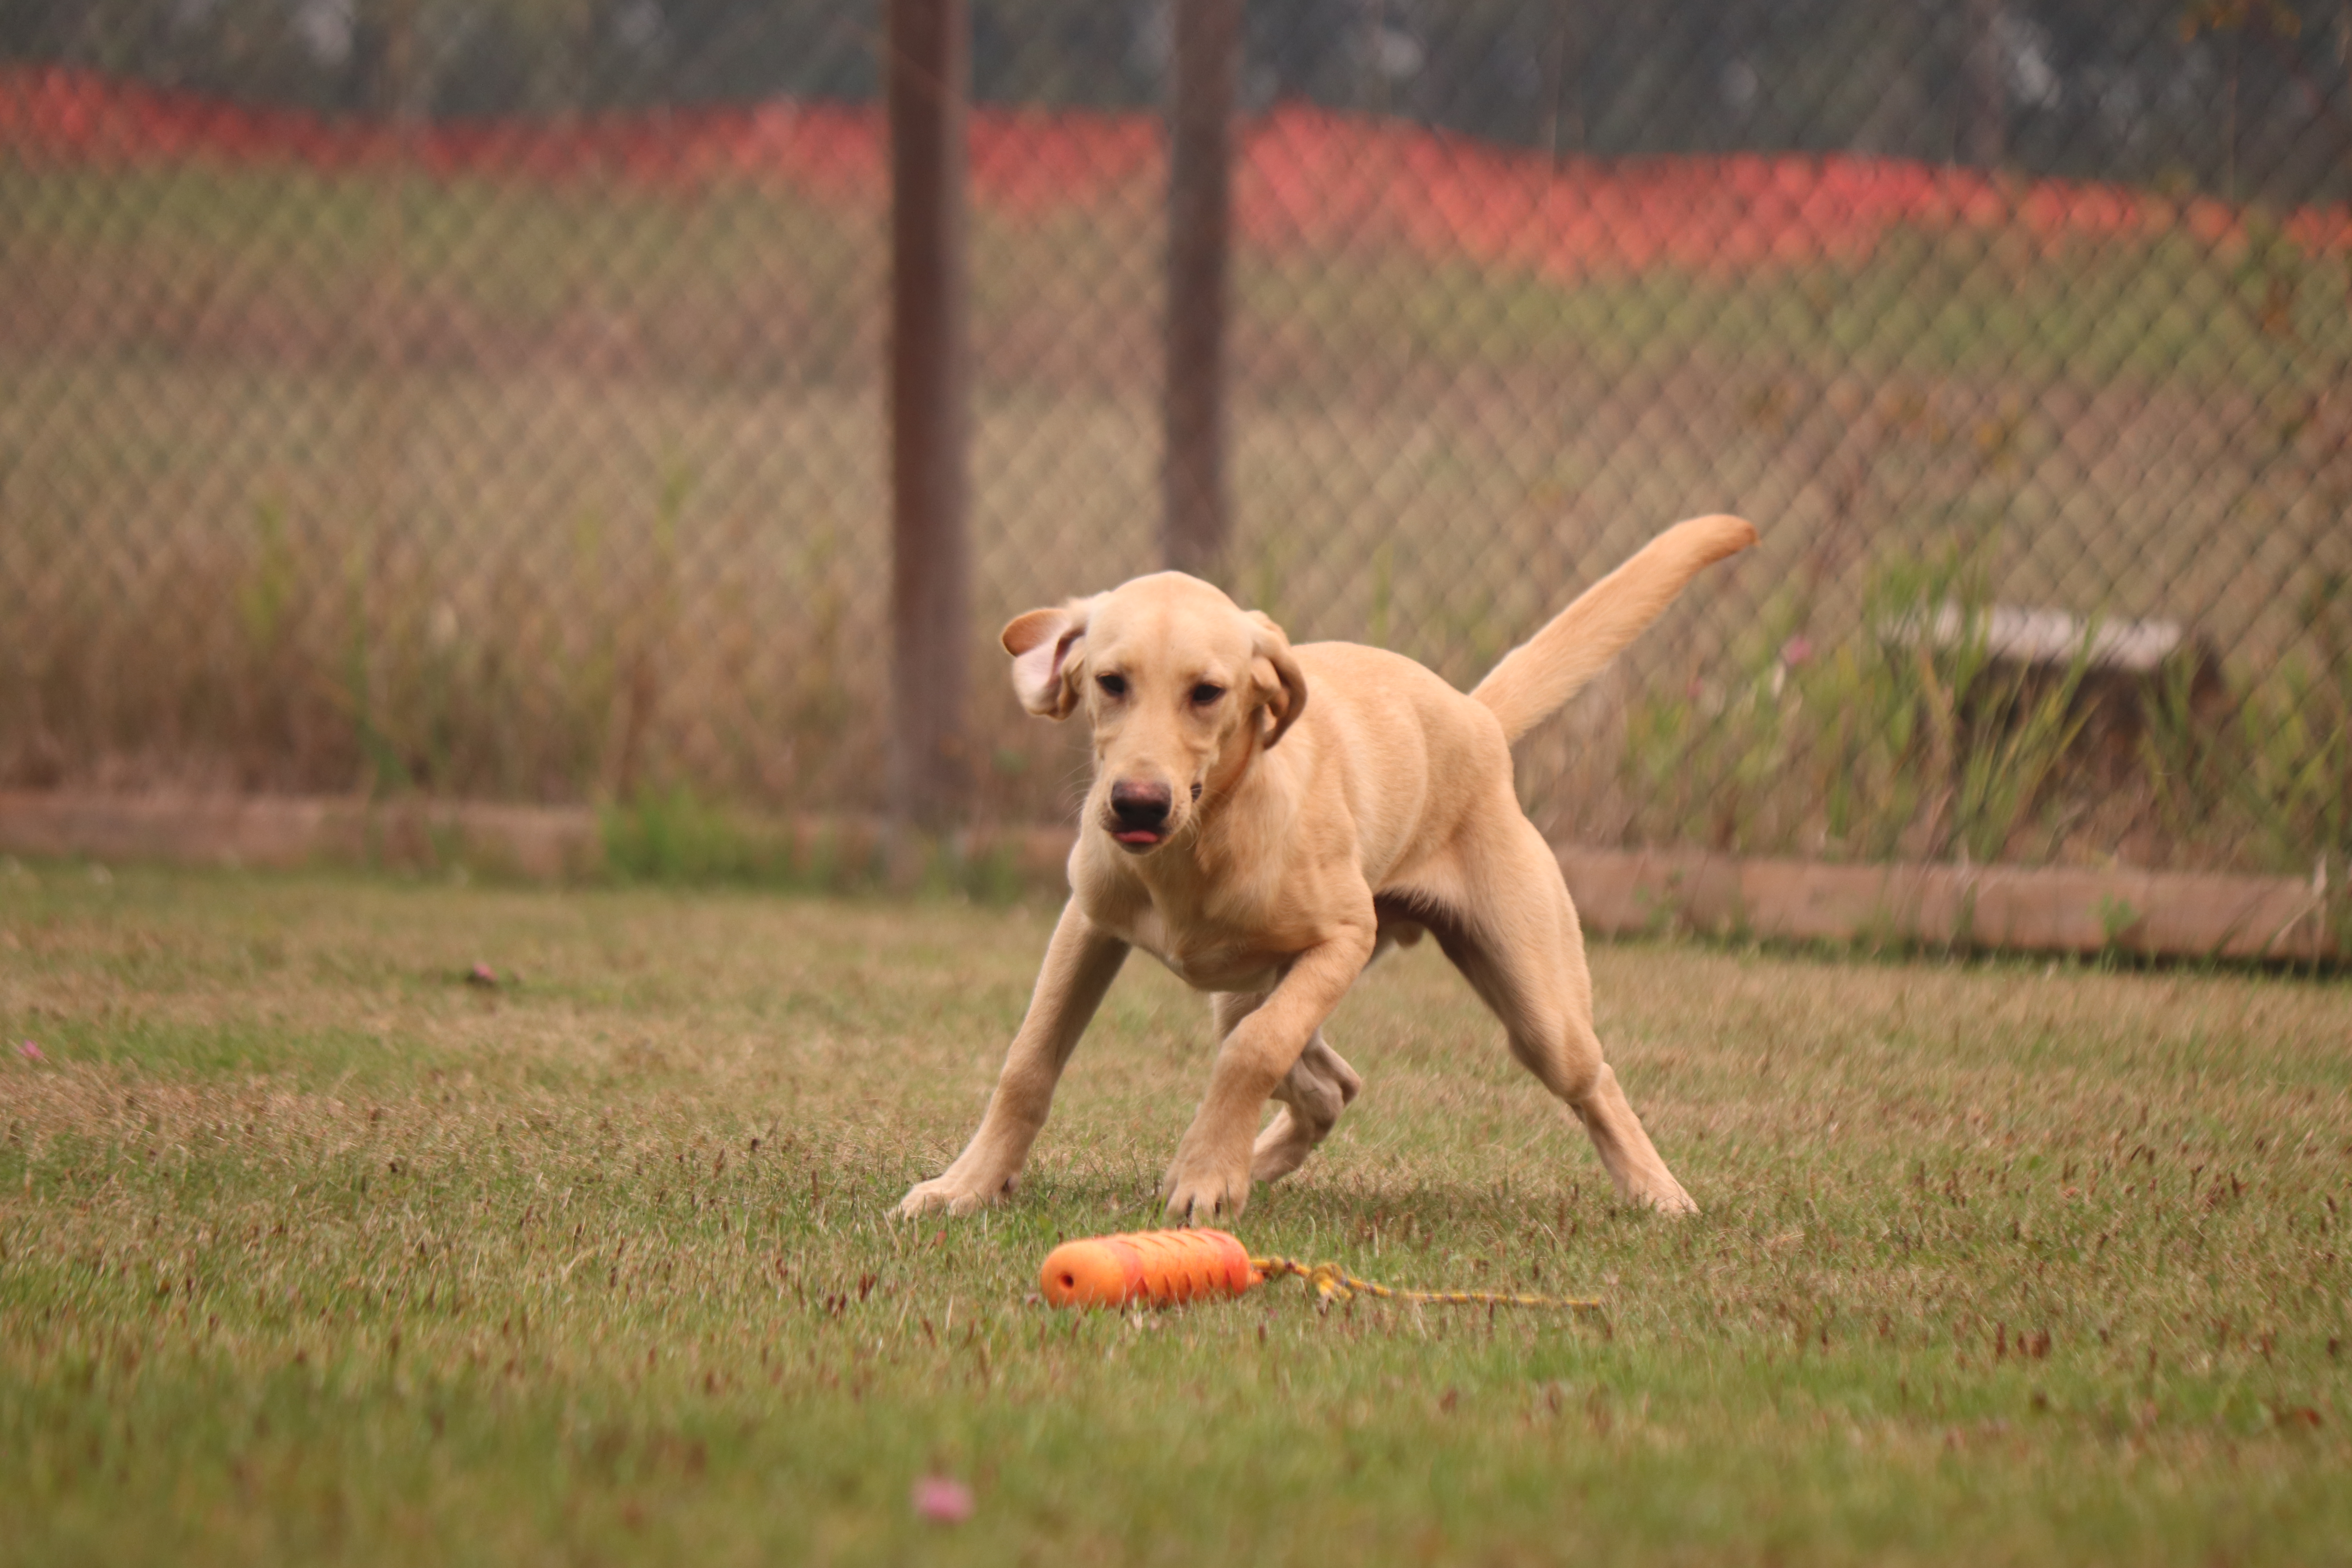 Trained Dogs For Sale | Eromit Labrador Retrievers